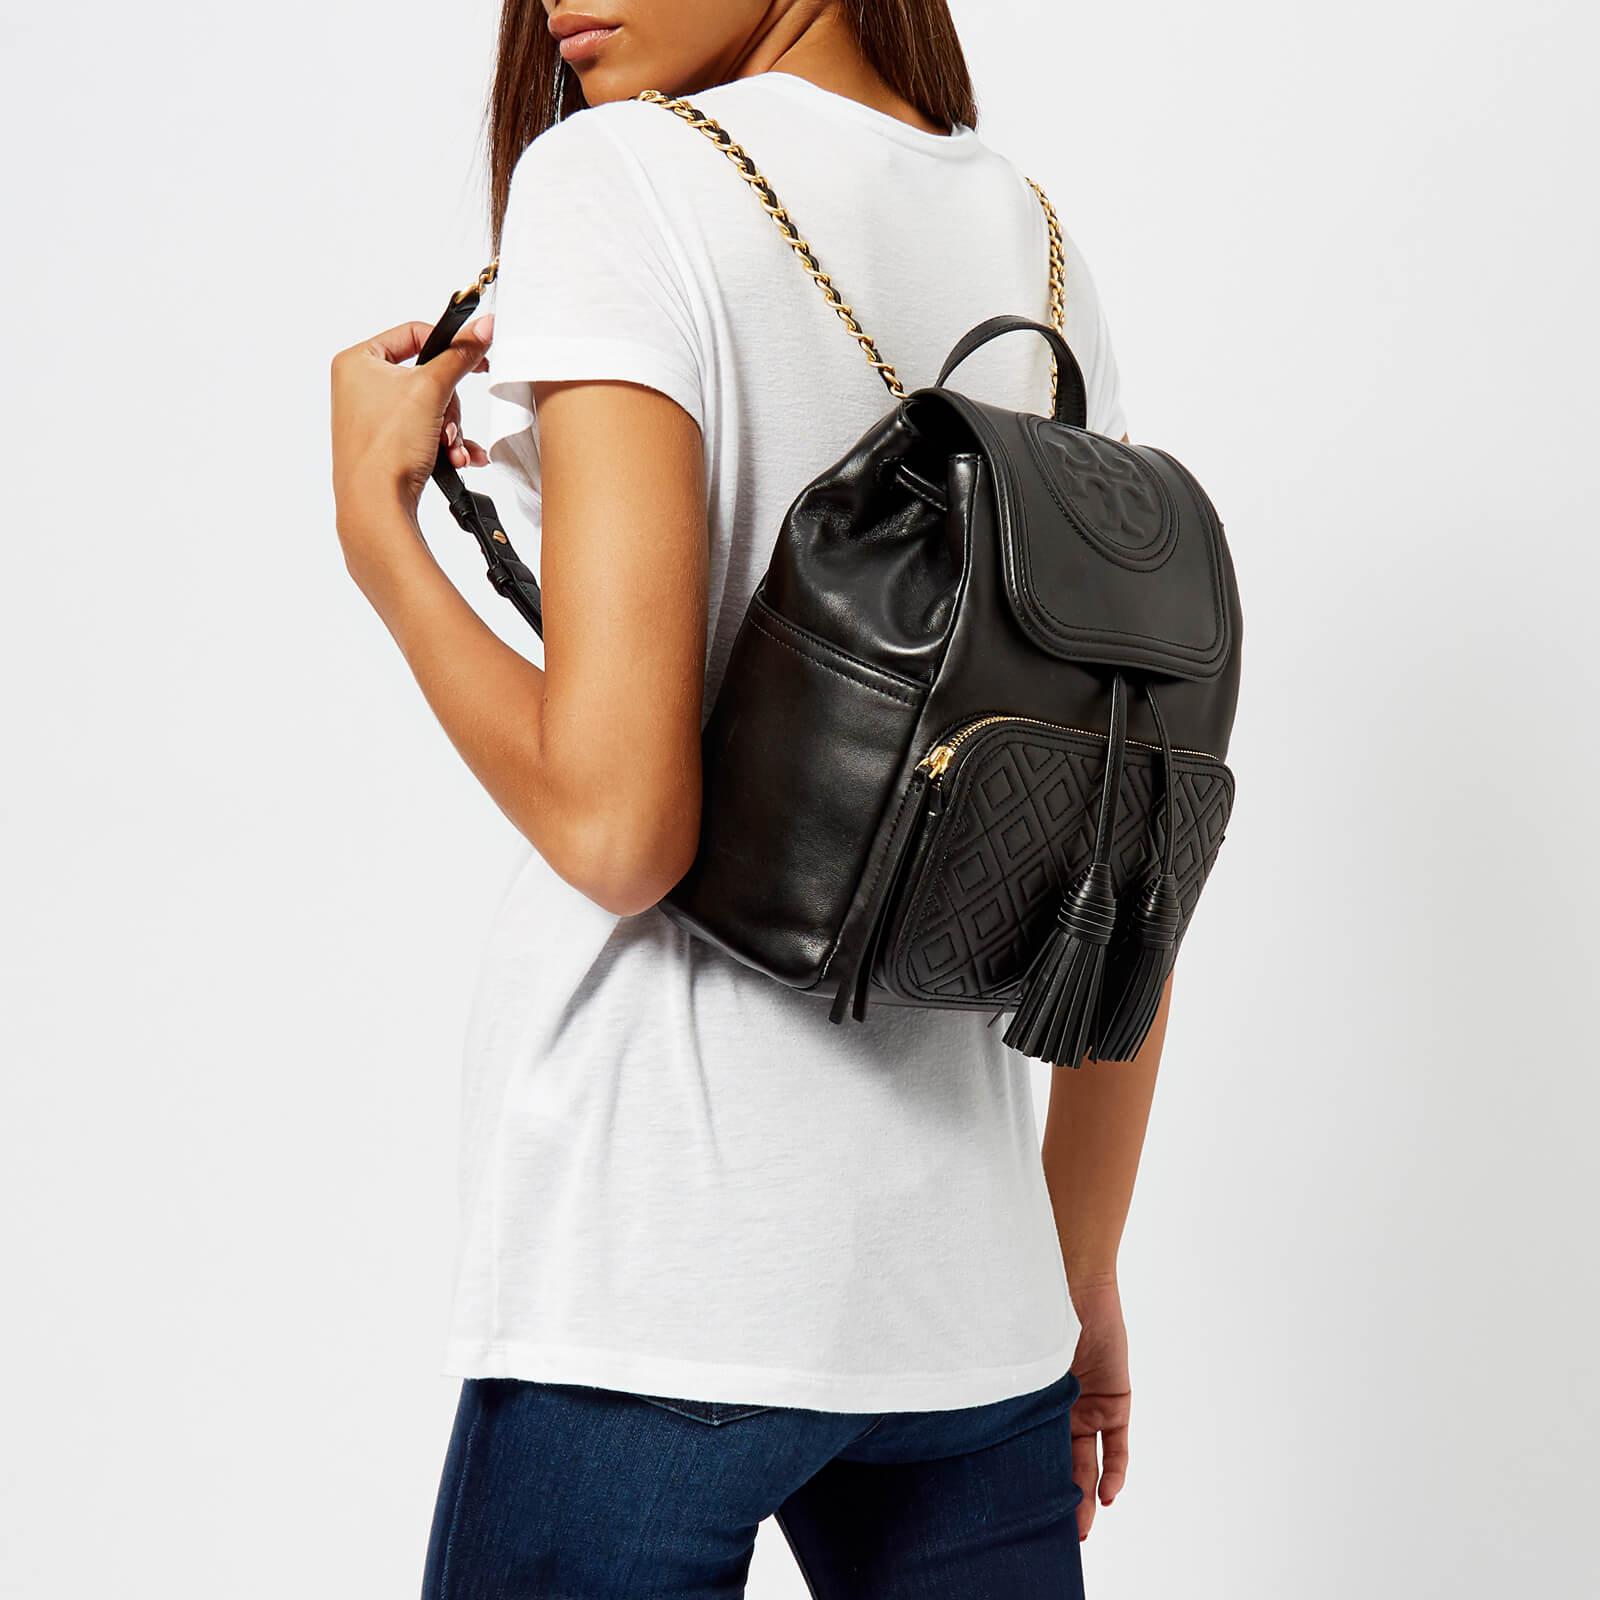 Total 107+ imagen tory burch soft fleming backpack - Abzlocal.mx